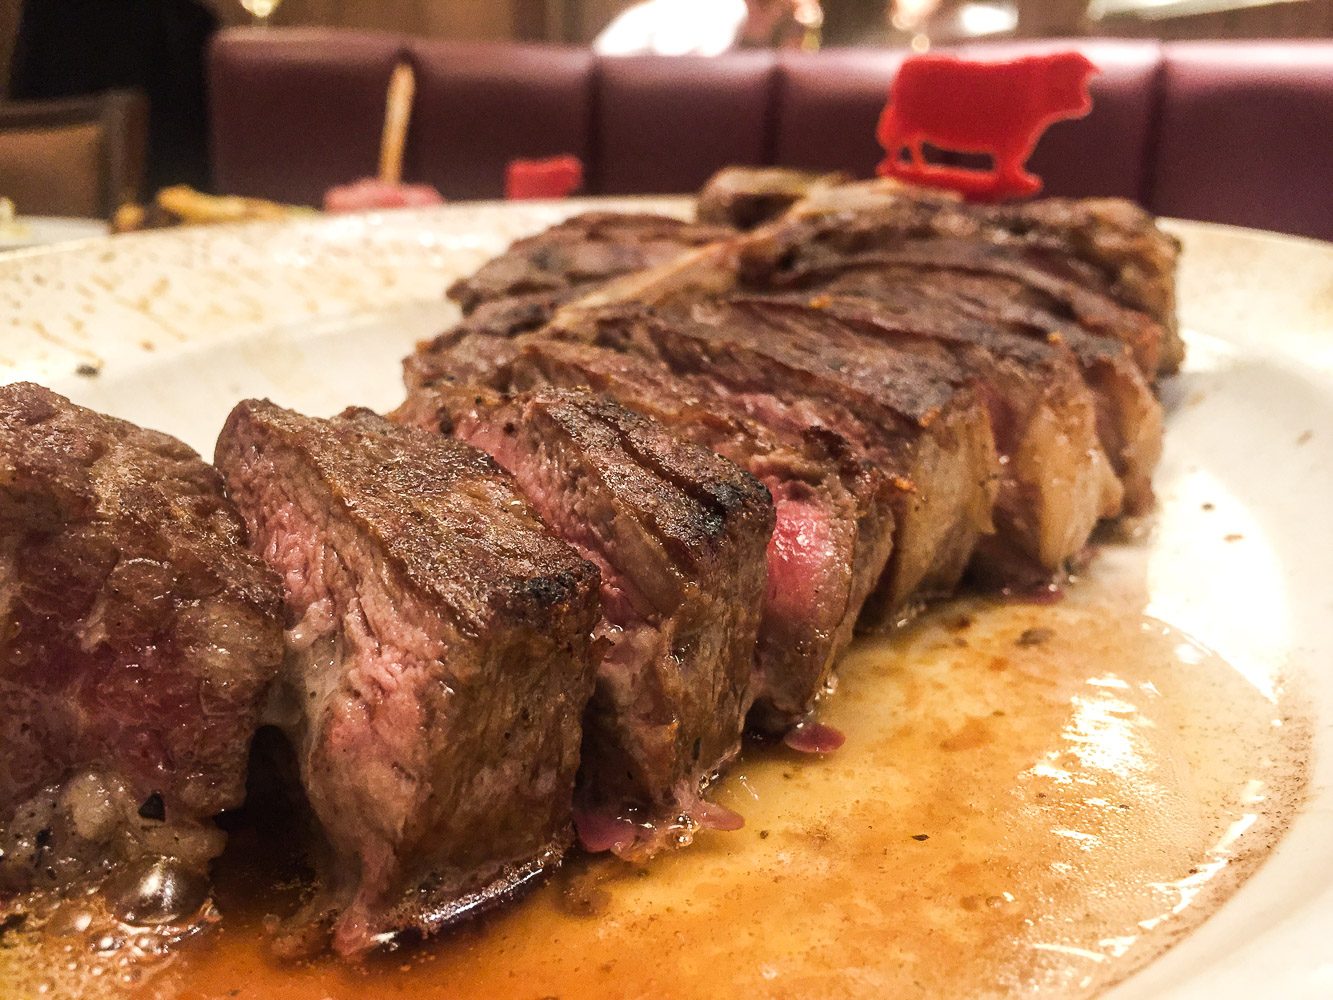 Sneak peek: 15 things to try at the first Wolfgang’s Steakhouse in PH